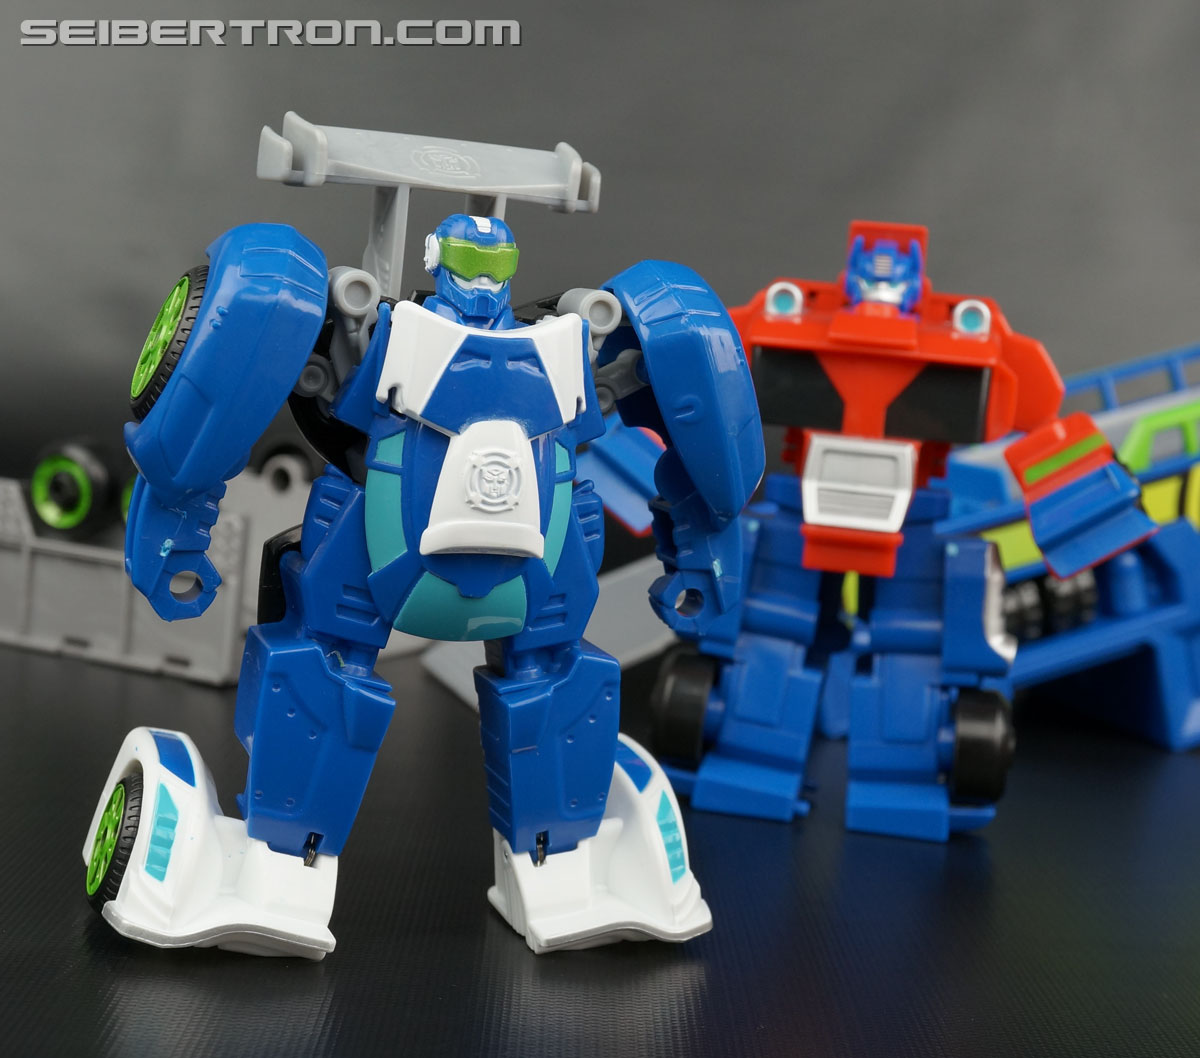 Transformers Rescue Bots Blurr (Image #69 of 78)